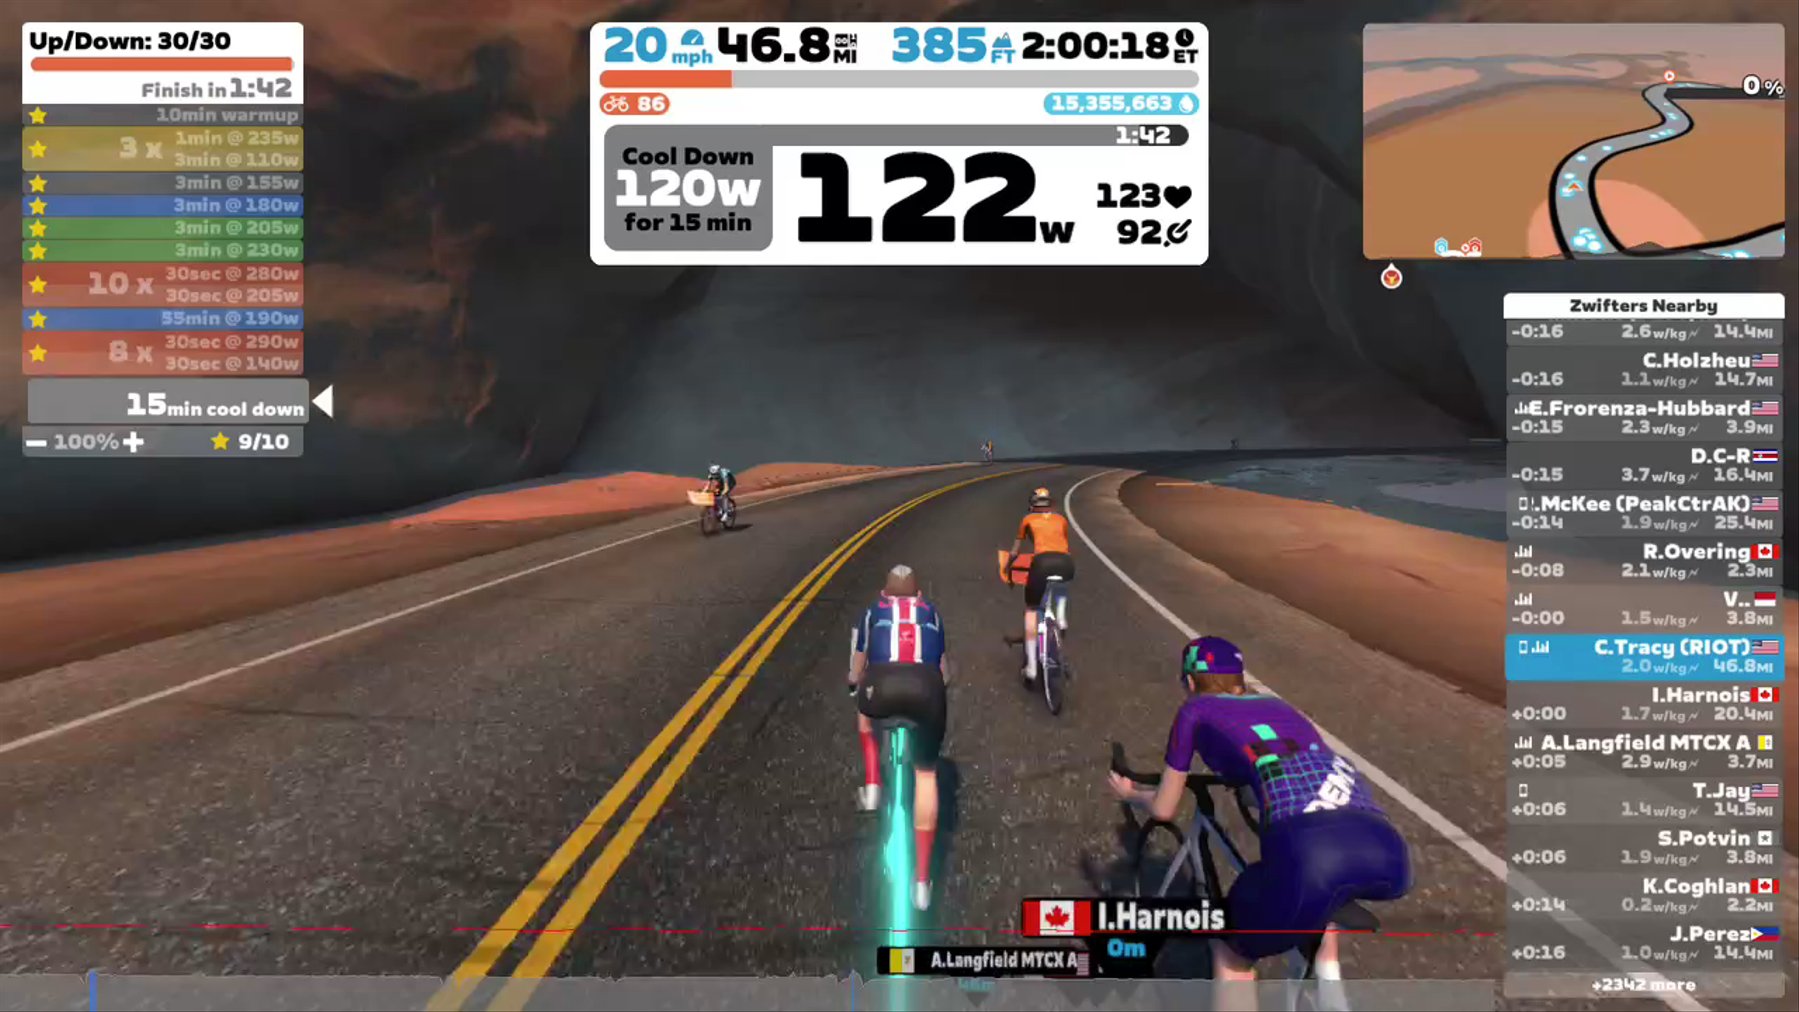 Zwift - Up/Down: 30/30 in Watopia